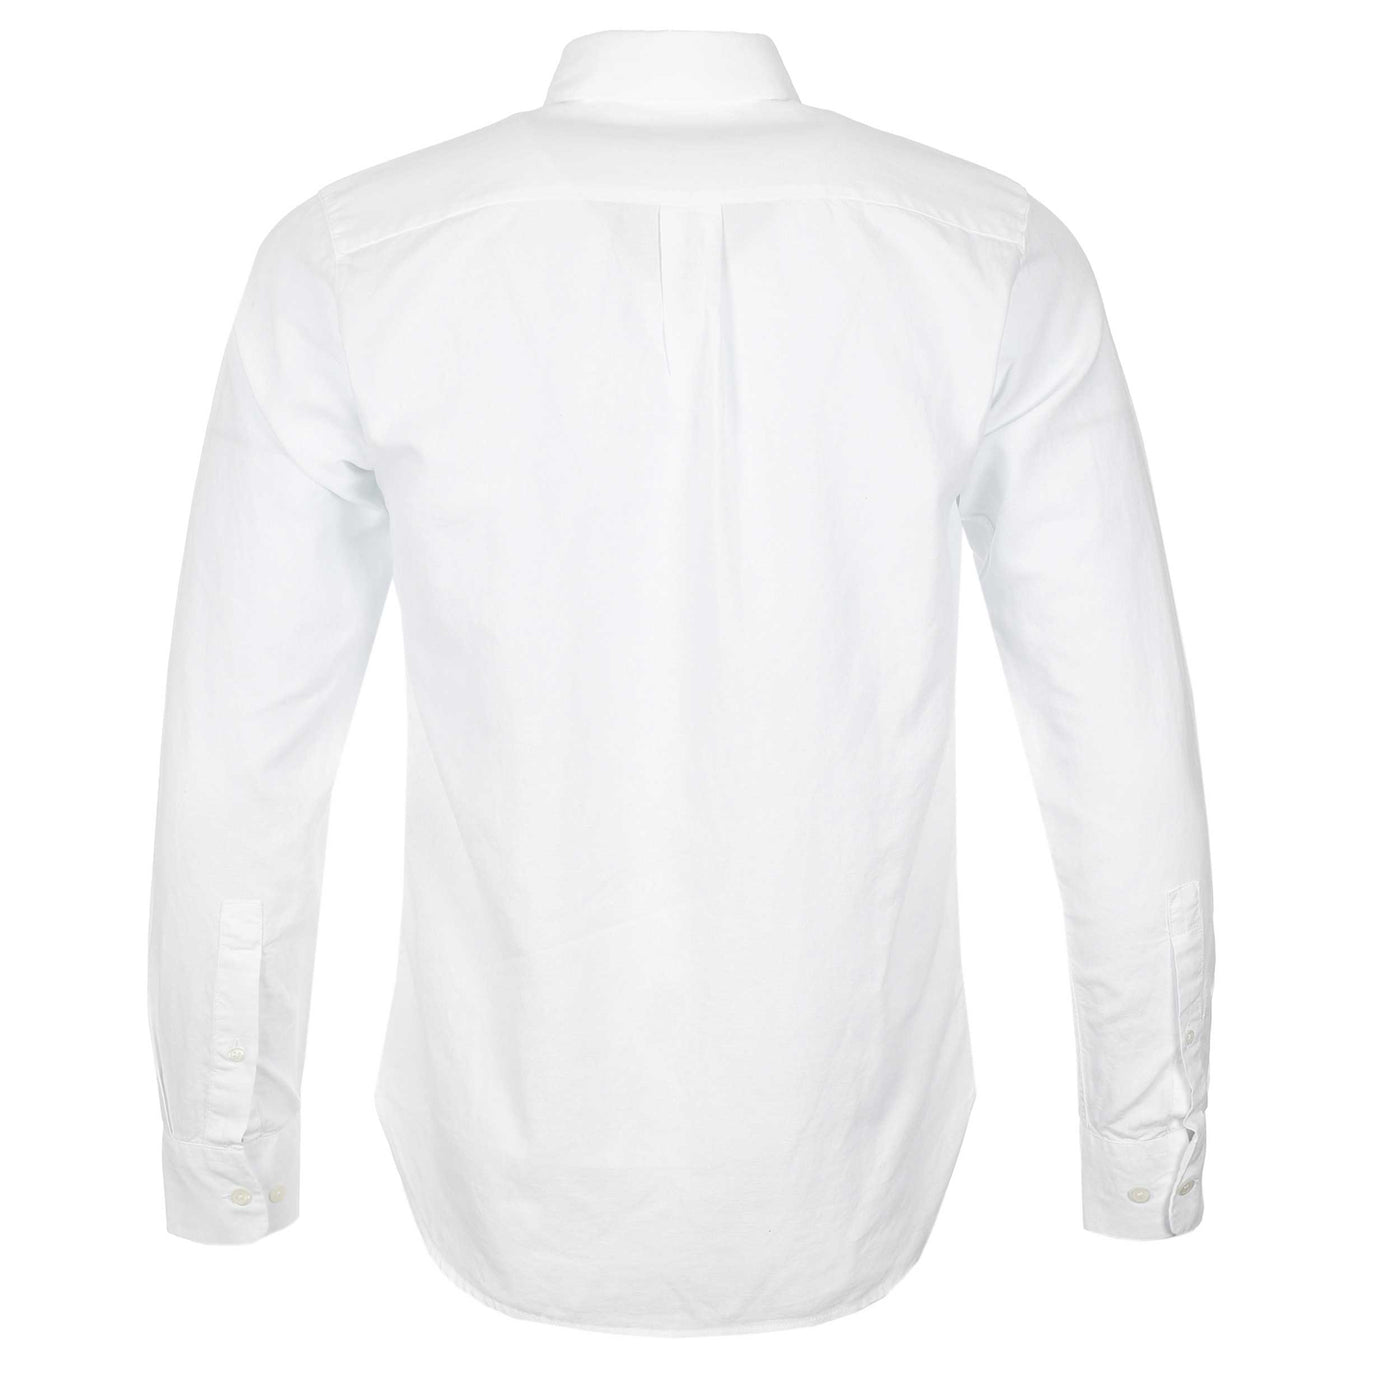 Oliver Sweeney Hawkesworth Shirt in White Back